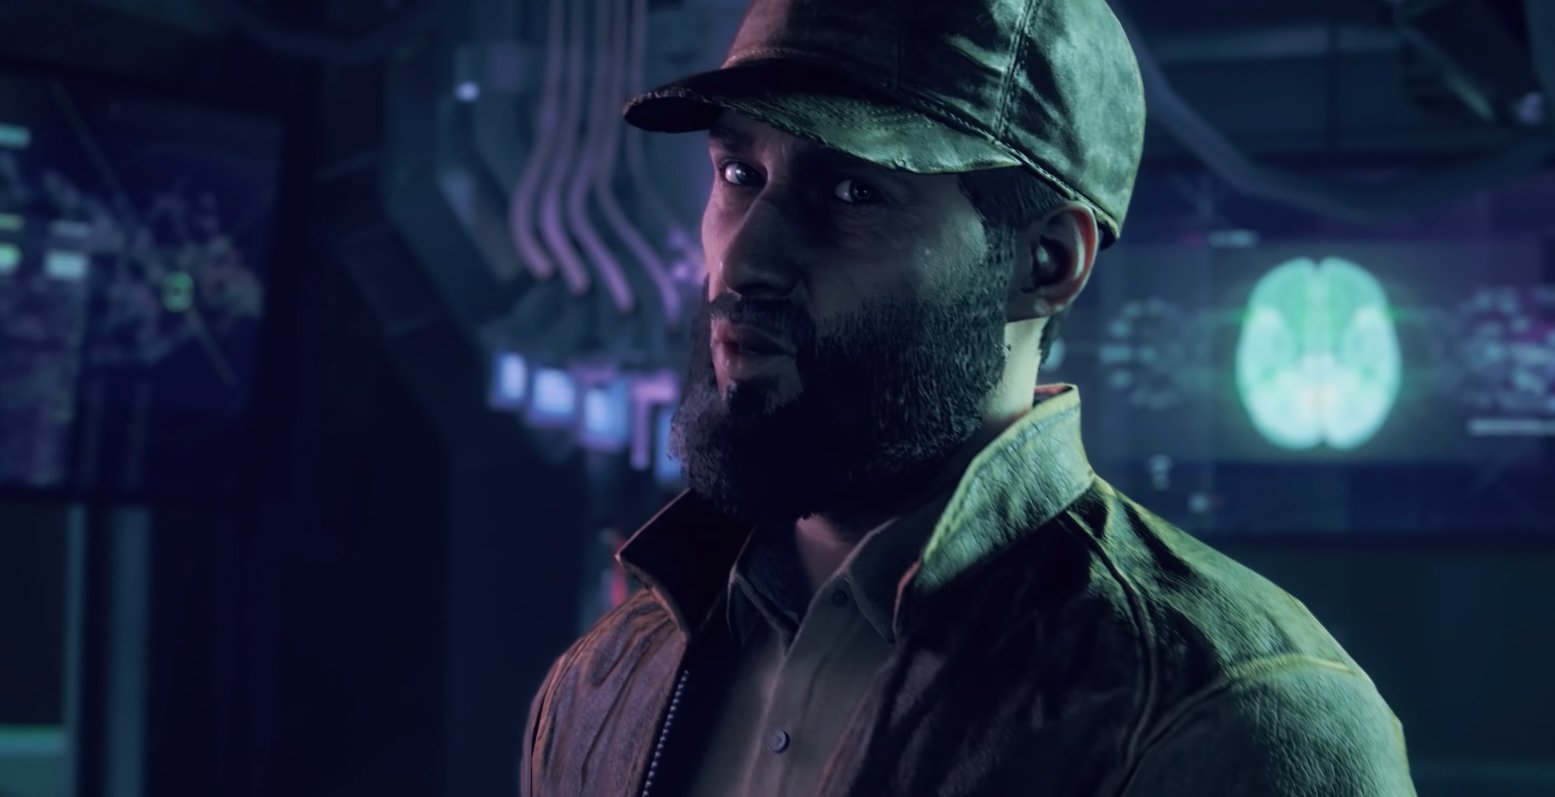 Watch Dogs Legion Bloodline Review - A Personality Injection